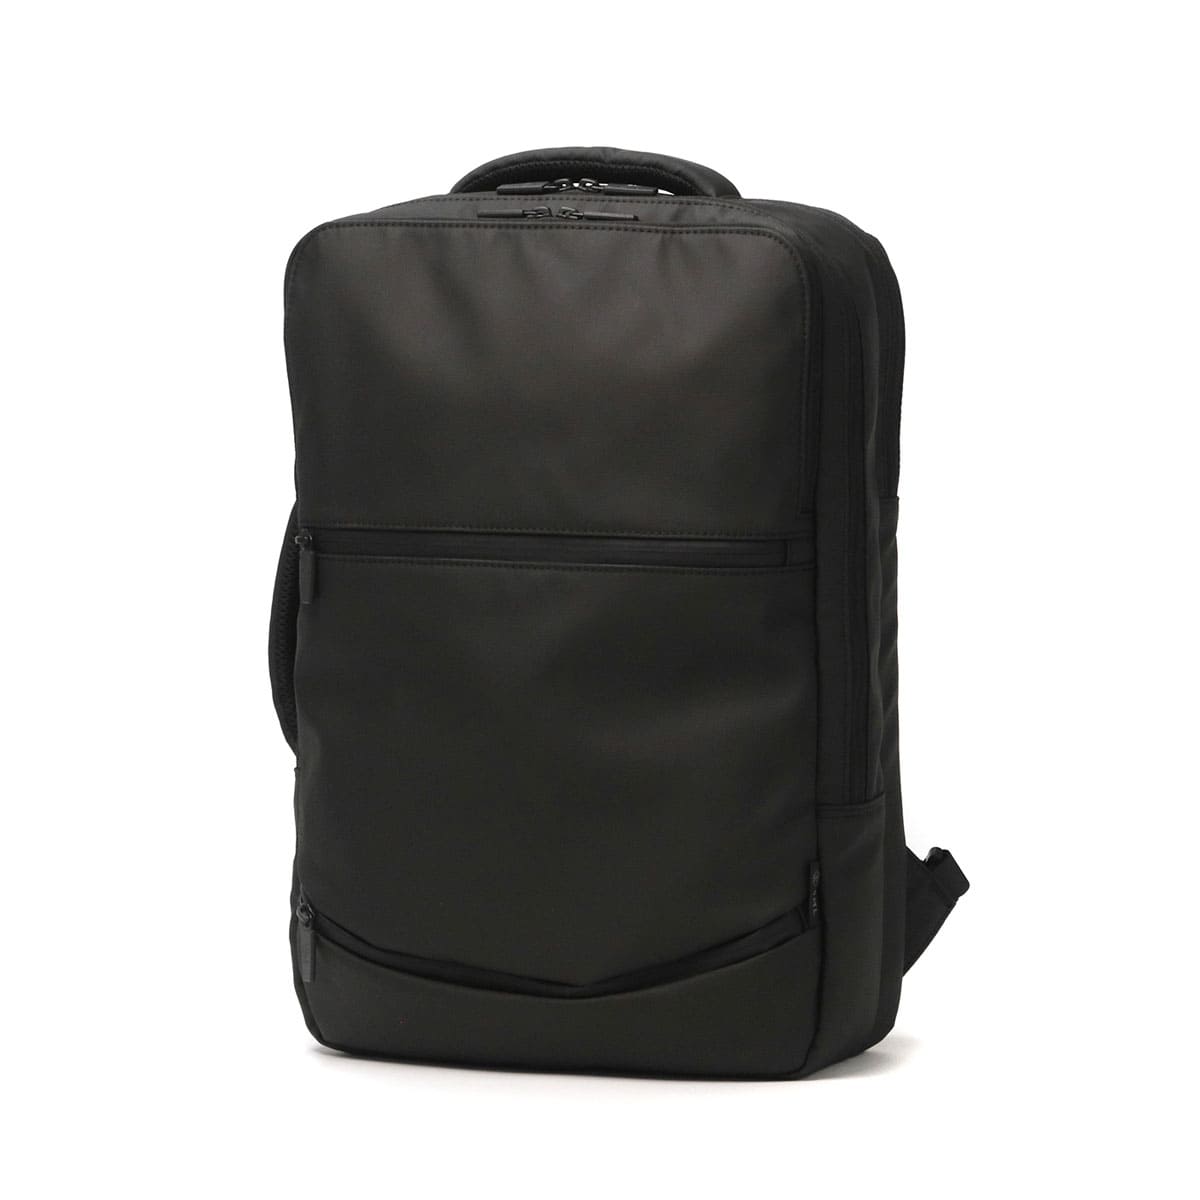 SML エスエムエル THIERRY 2WAY BUSINESS RUCKSACK リュック A4 